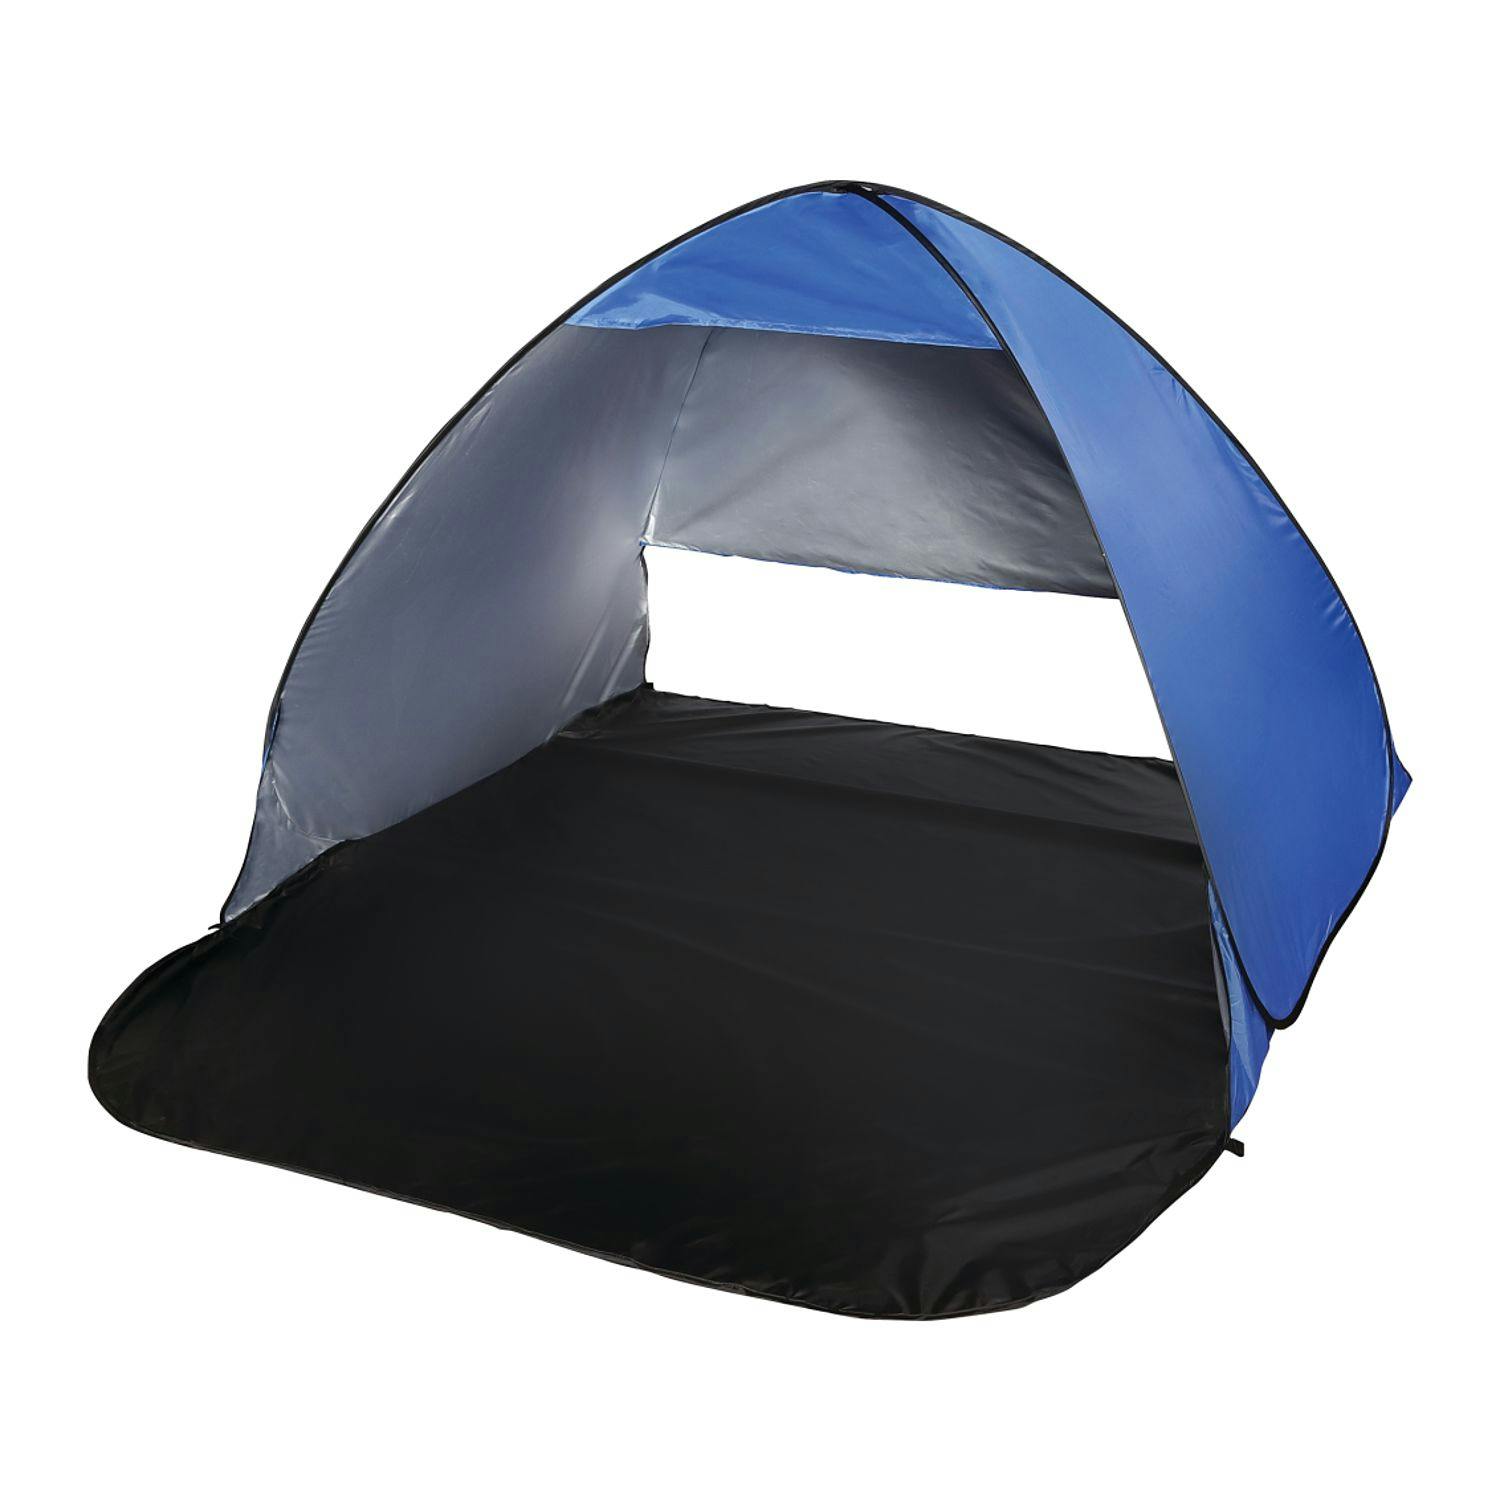 Pop Up Beach Tent - additional Image 1